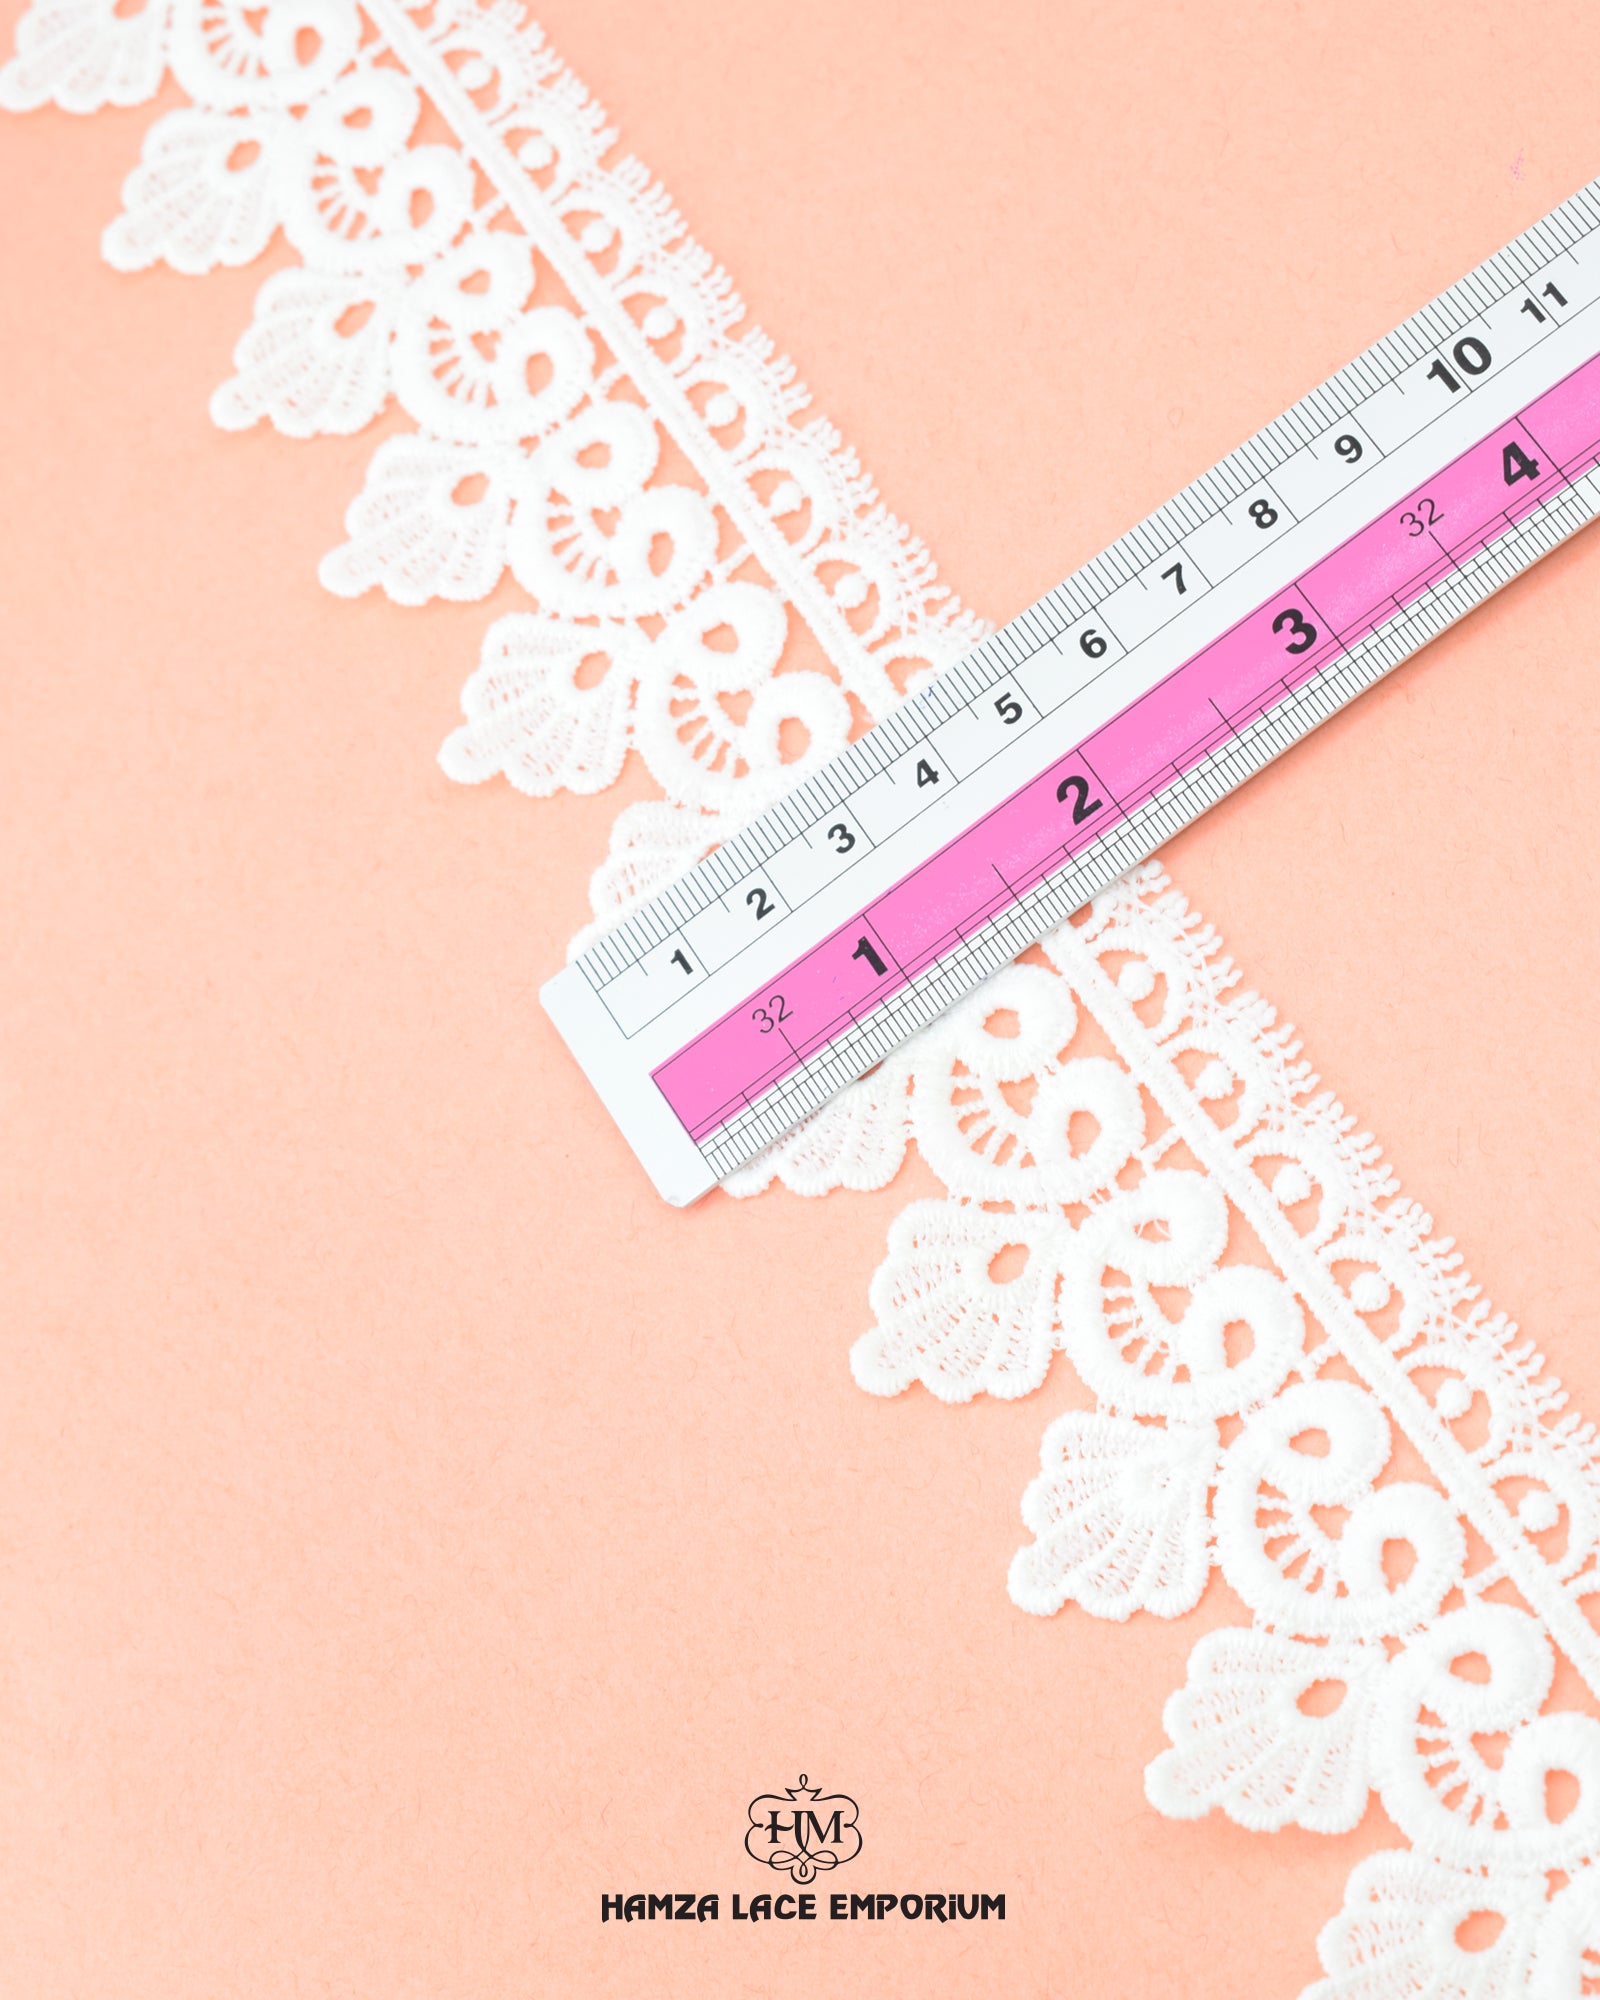 Size of the 'Edging Lace 23452' is given as 2 inches with the help of a ruler